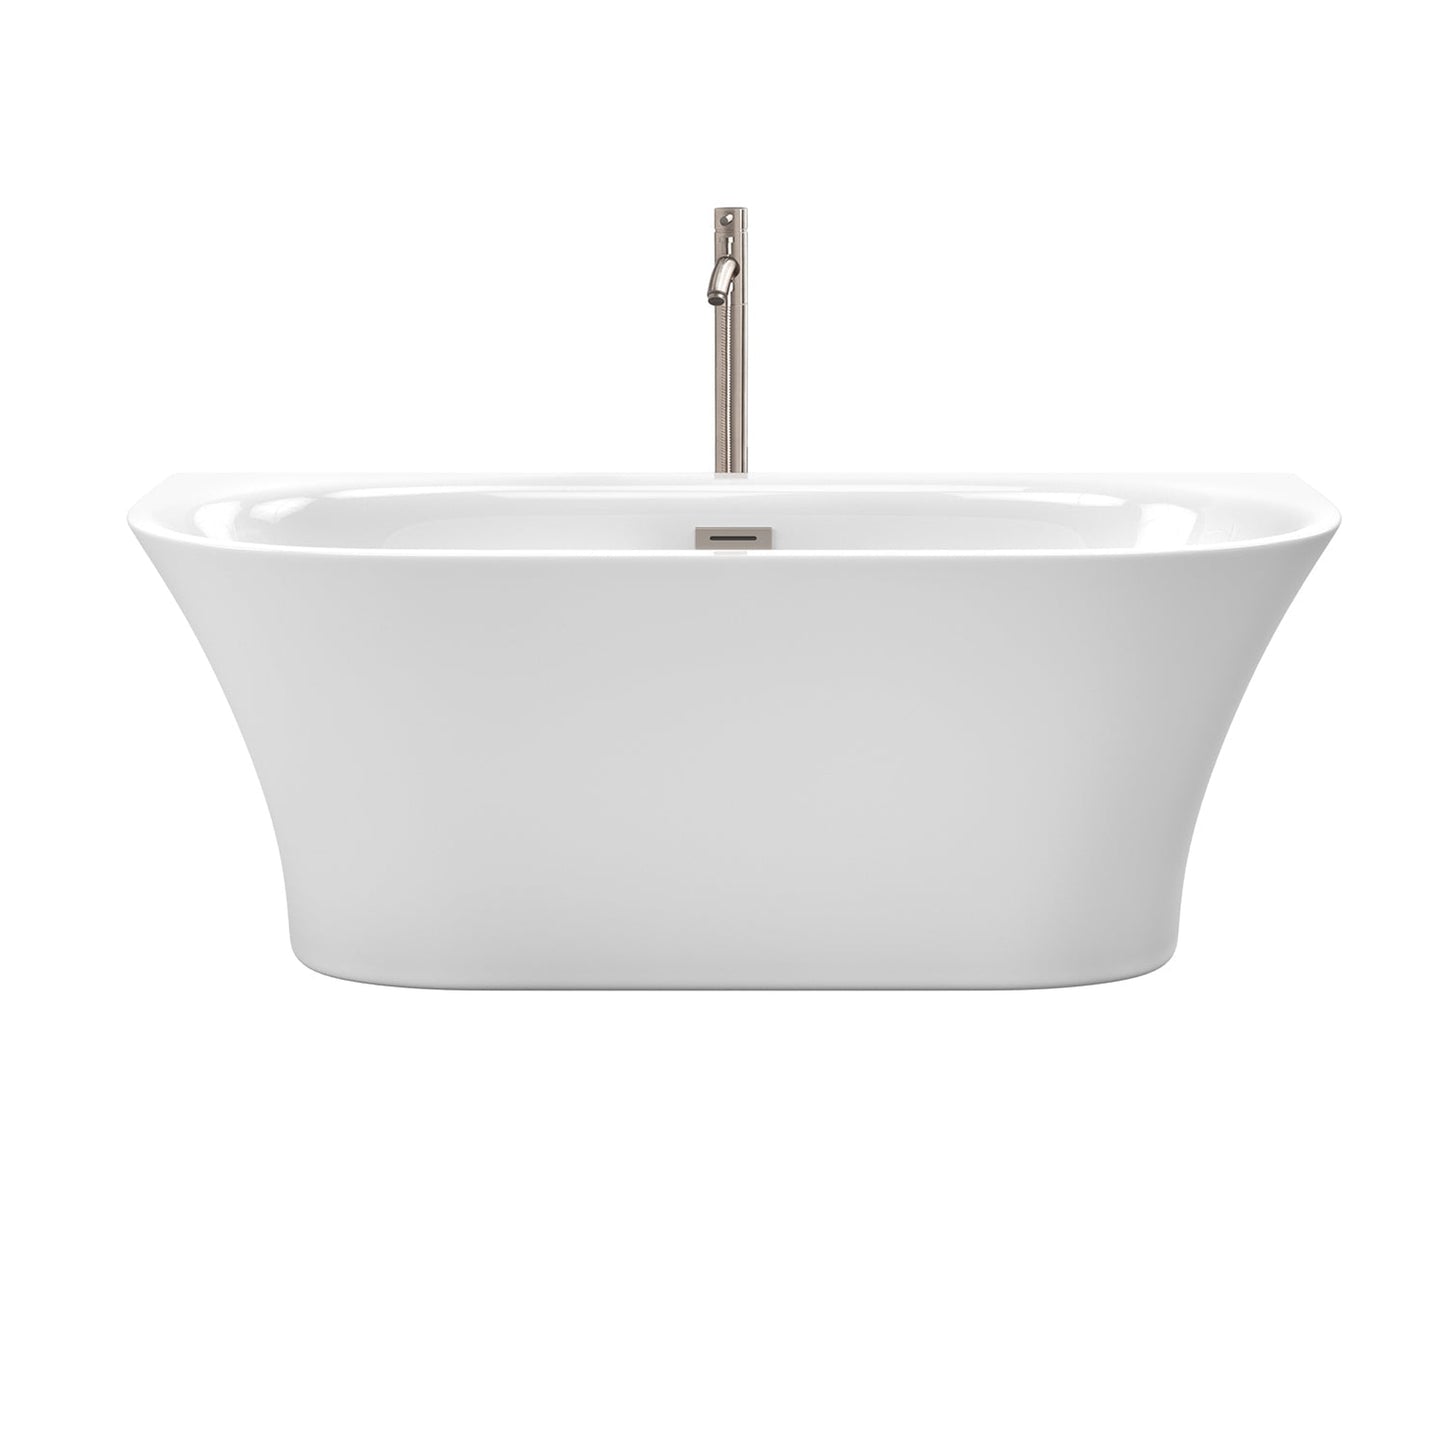 Wyndham Collection Cybill 67" Freestanding Bathtub in White With Floor Mounted Faucet, Drain and Overflow Trim in Brushed Nickel